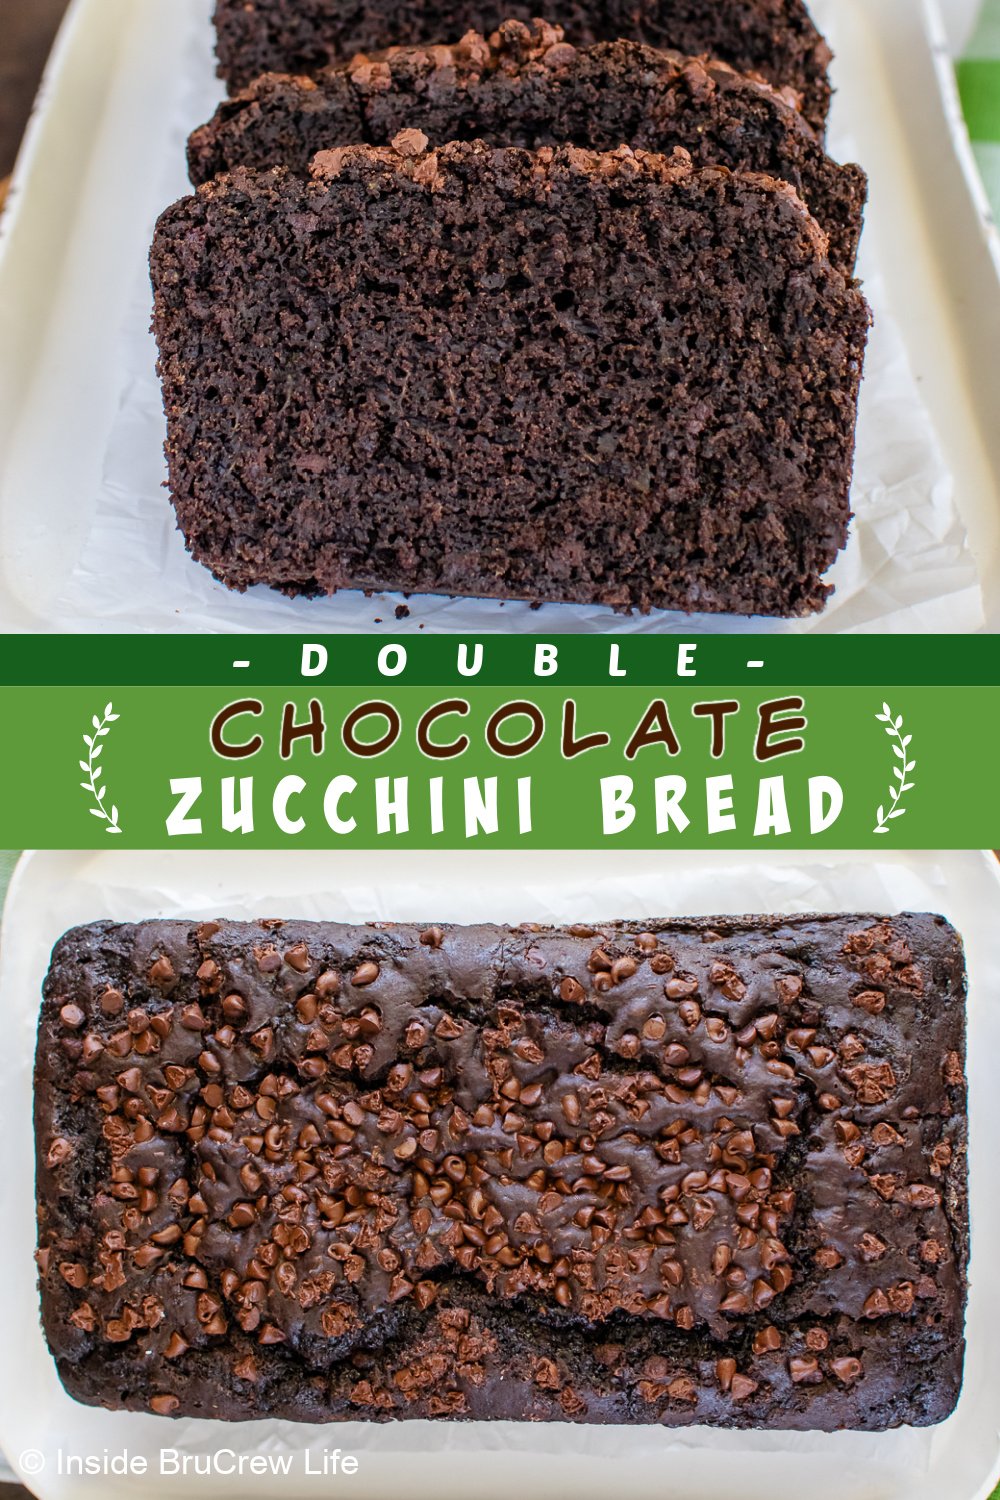 Two pictures of chocolate zucchini bread collaged with a green text box.